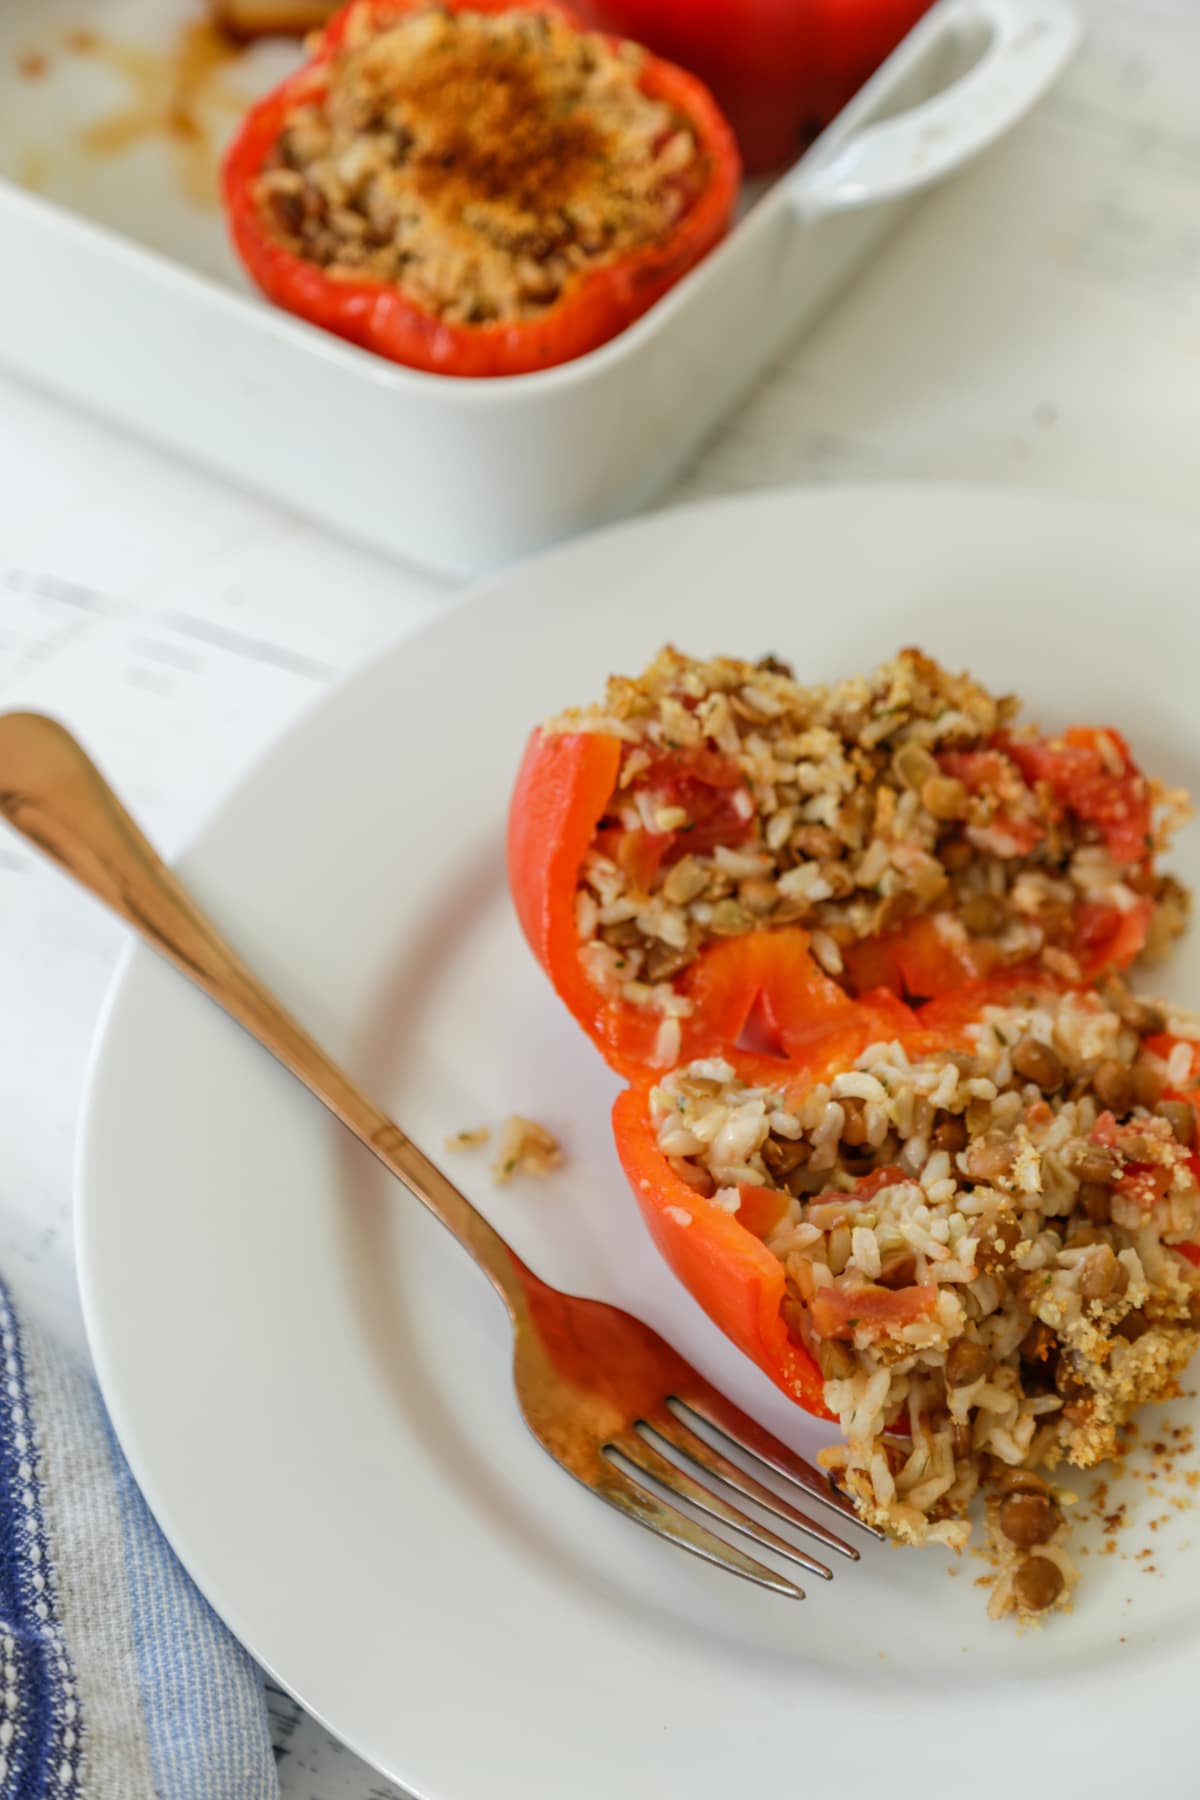 Red bell stuffed pepper on a white plate with a fork.